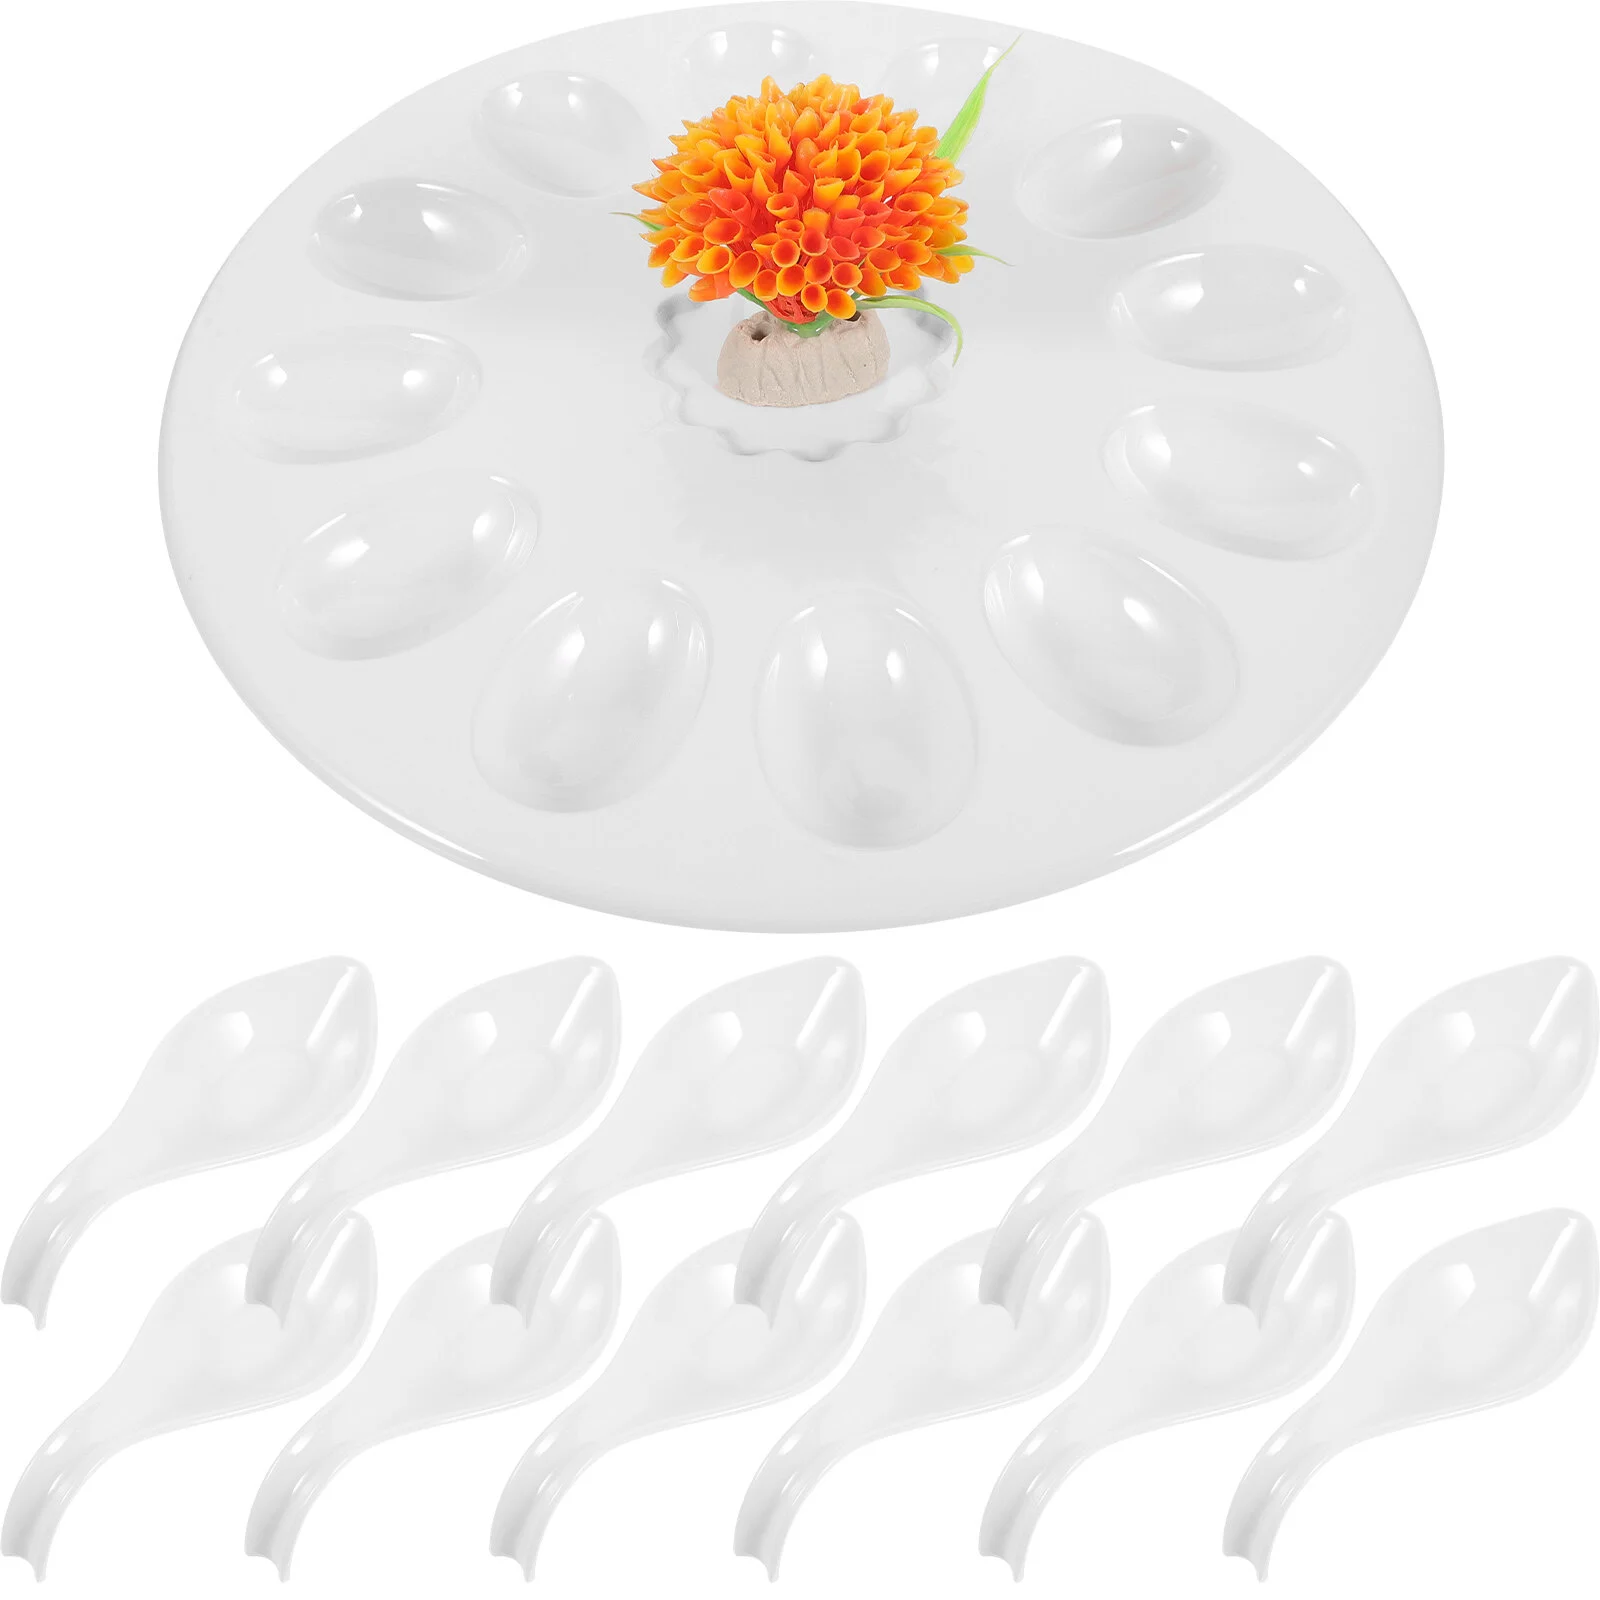 

Kitchen Dish Deviled Egg Plates Flatware Tray Snails Seafood Serving Plastic Platter Spoons Trays Eggs